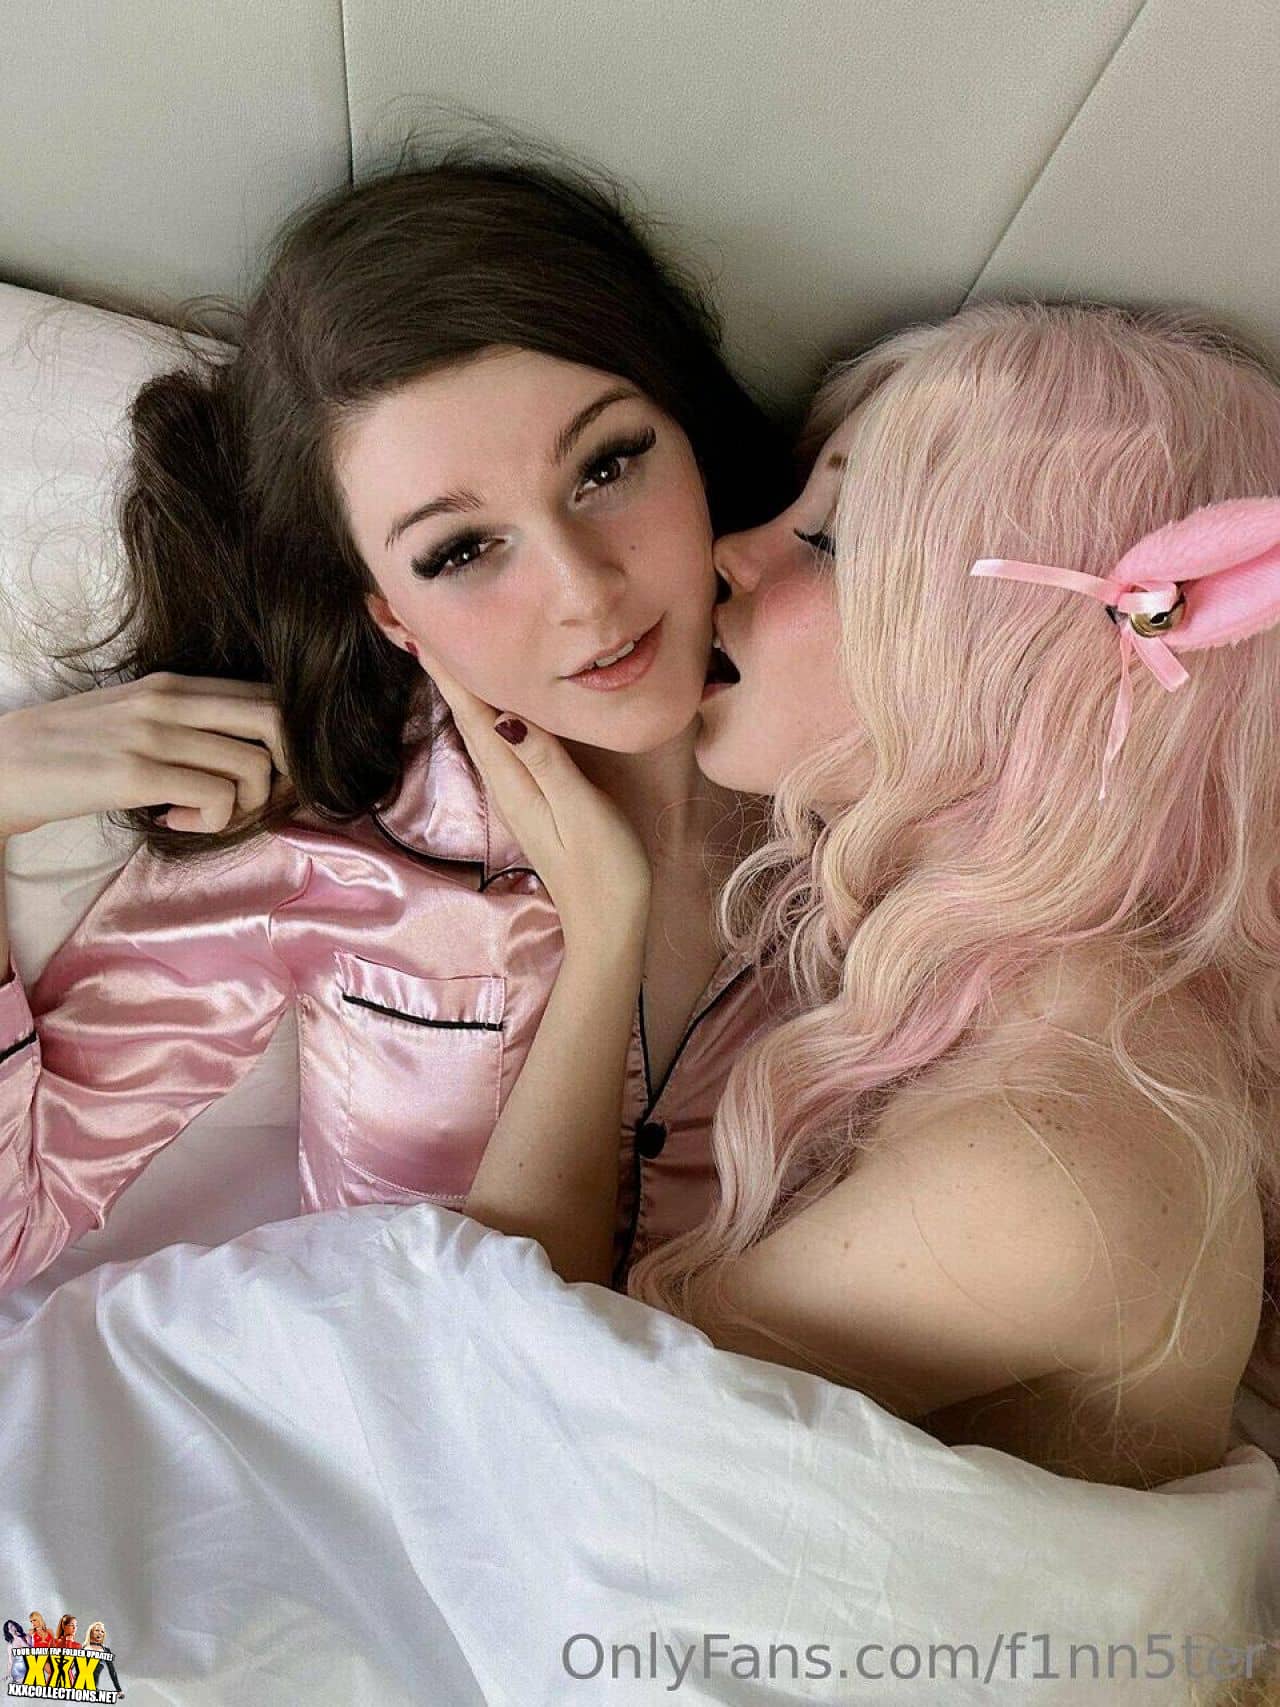 Belle delphine and f1nn5ter porn